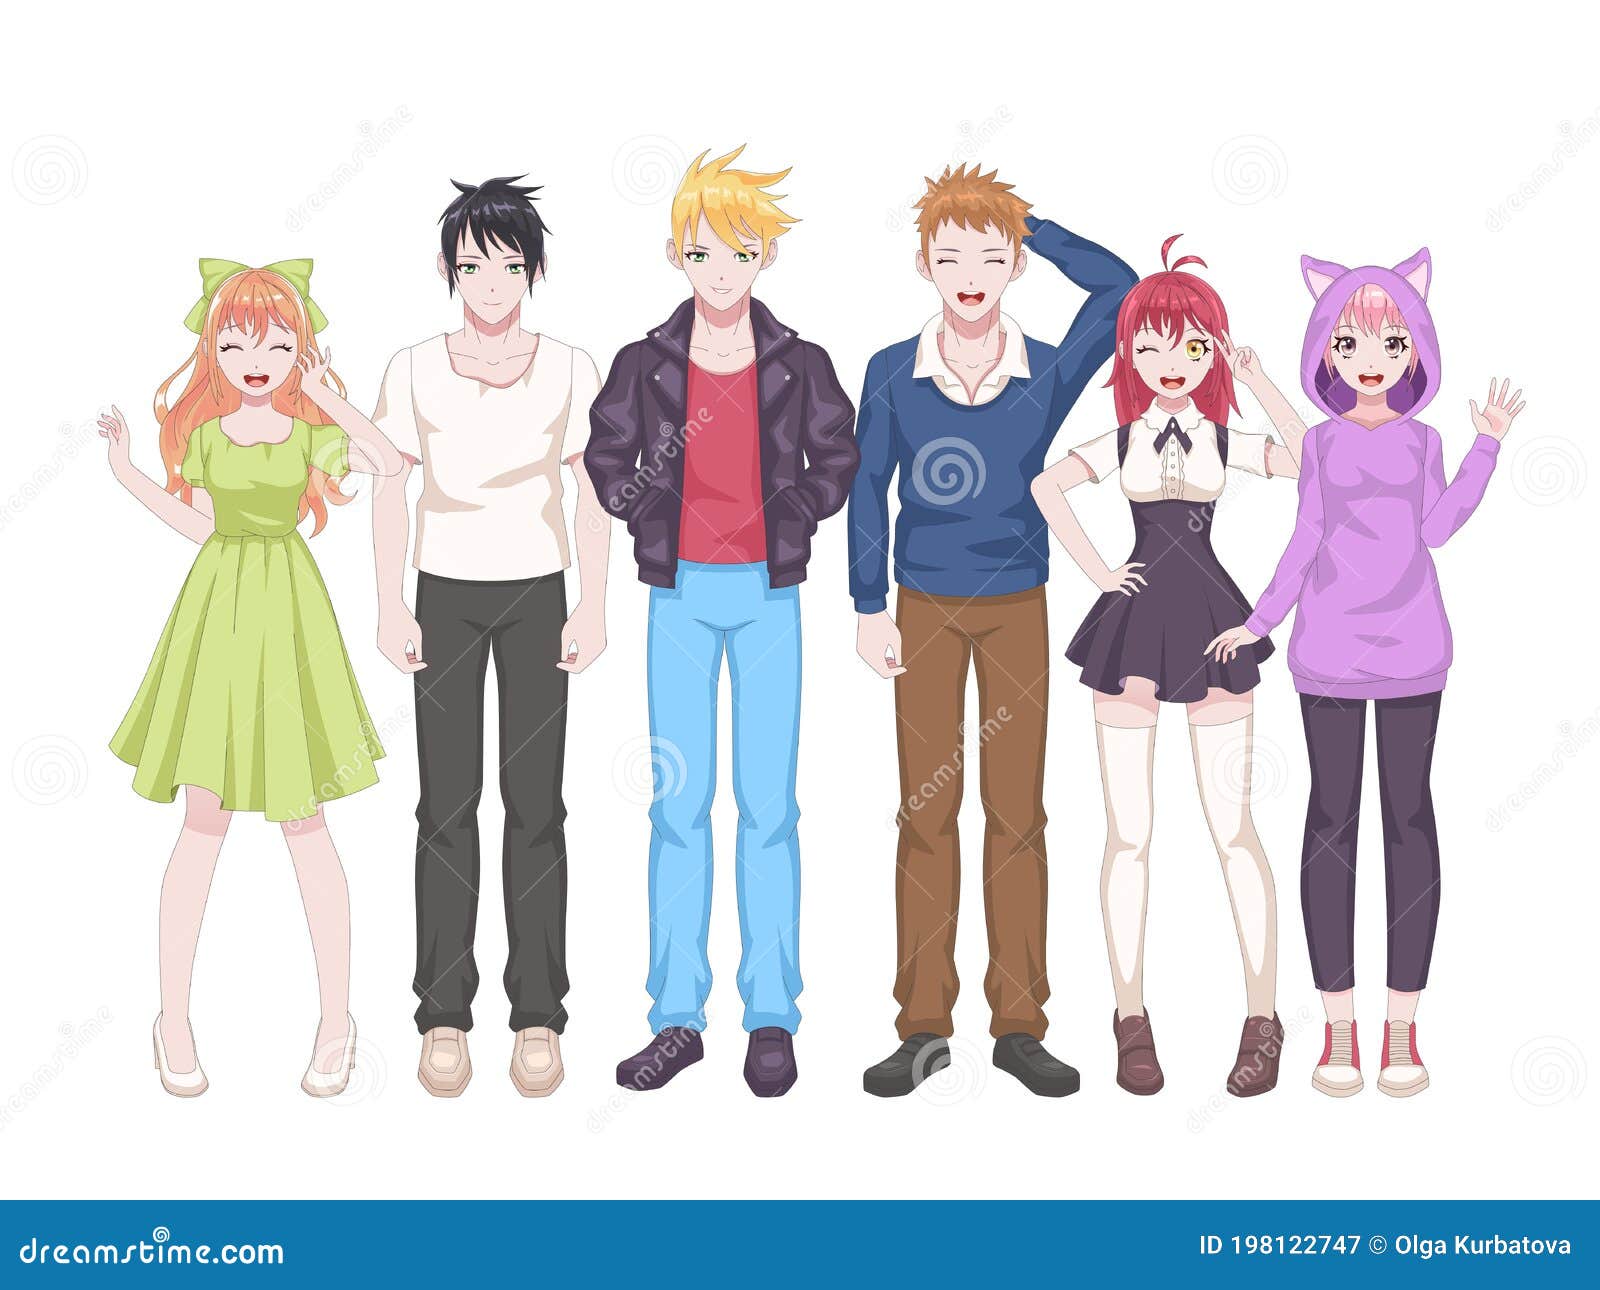 AnimeSunday: Dylan's Favorite Anime Characters To Cosplay — Your Site Title